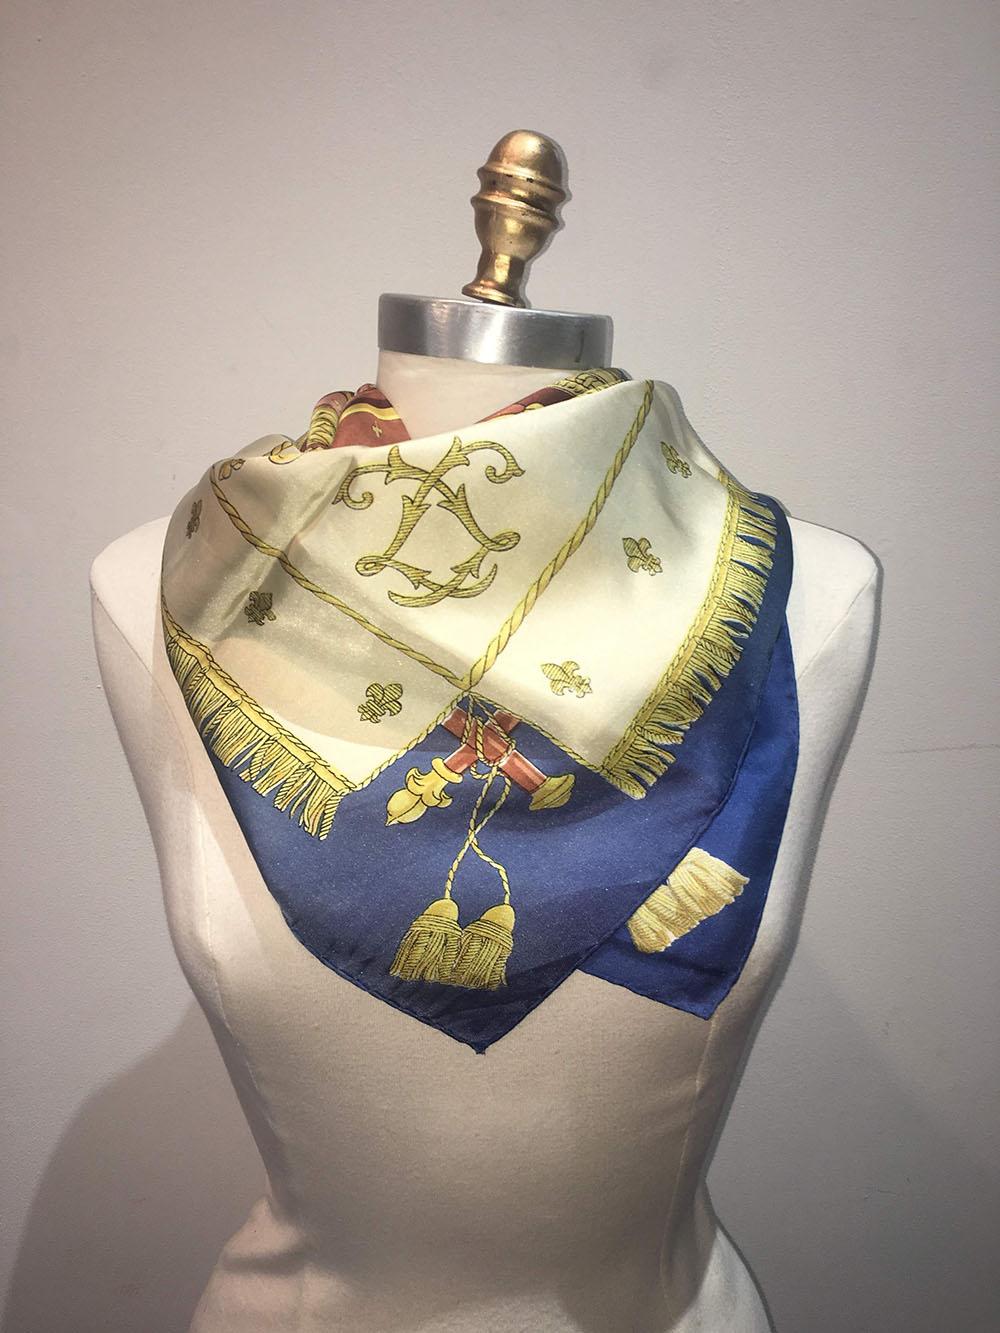 BEAUTIFUL Hermes Vintage Vue De Carrosse de la Galere la Reale Silk Scarf c1950s in fair condition. Centered illustration of an antique wooden ship adorned with gold trims and embellishments and blue deck coverings with coachmen on either side.